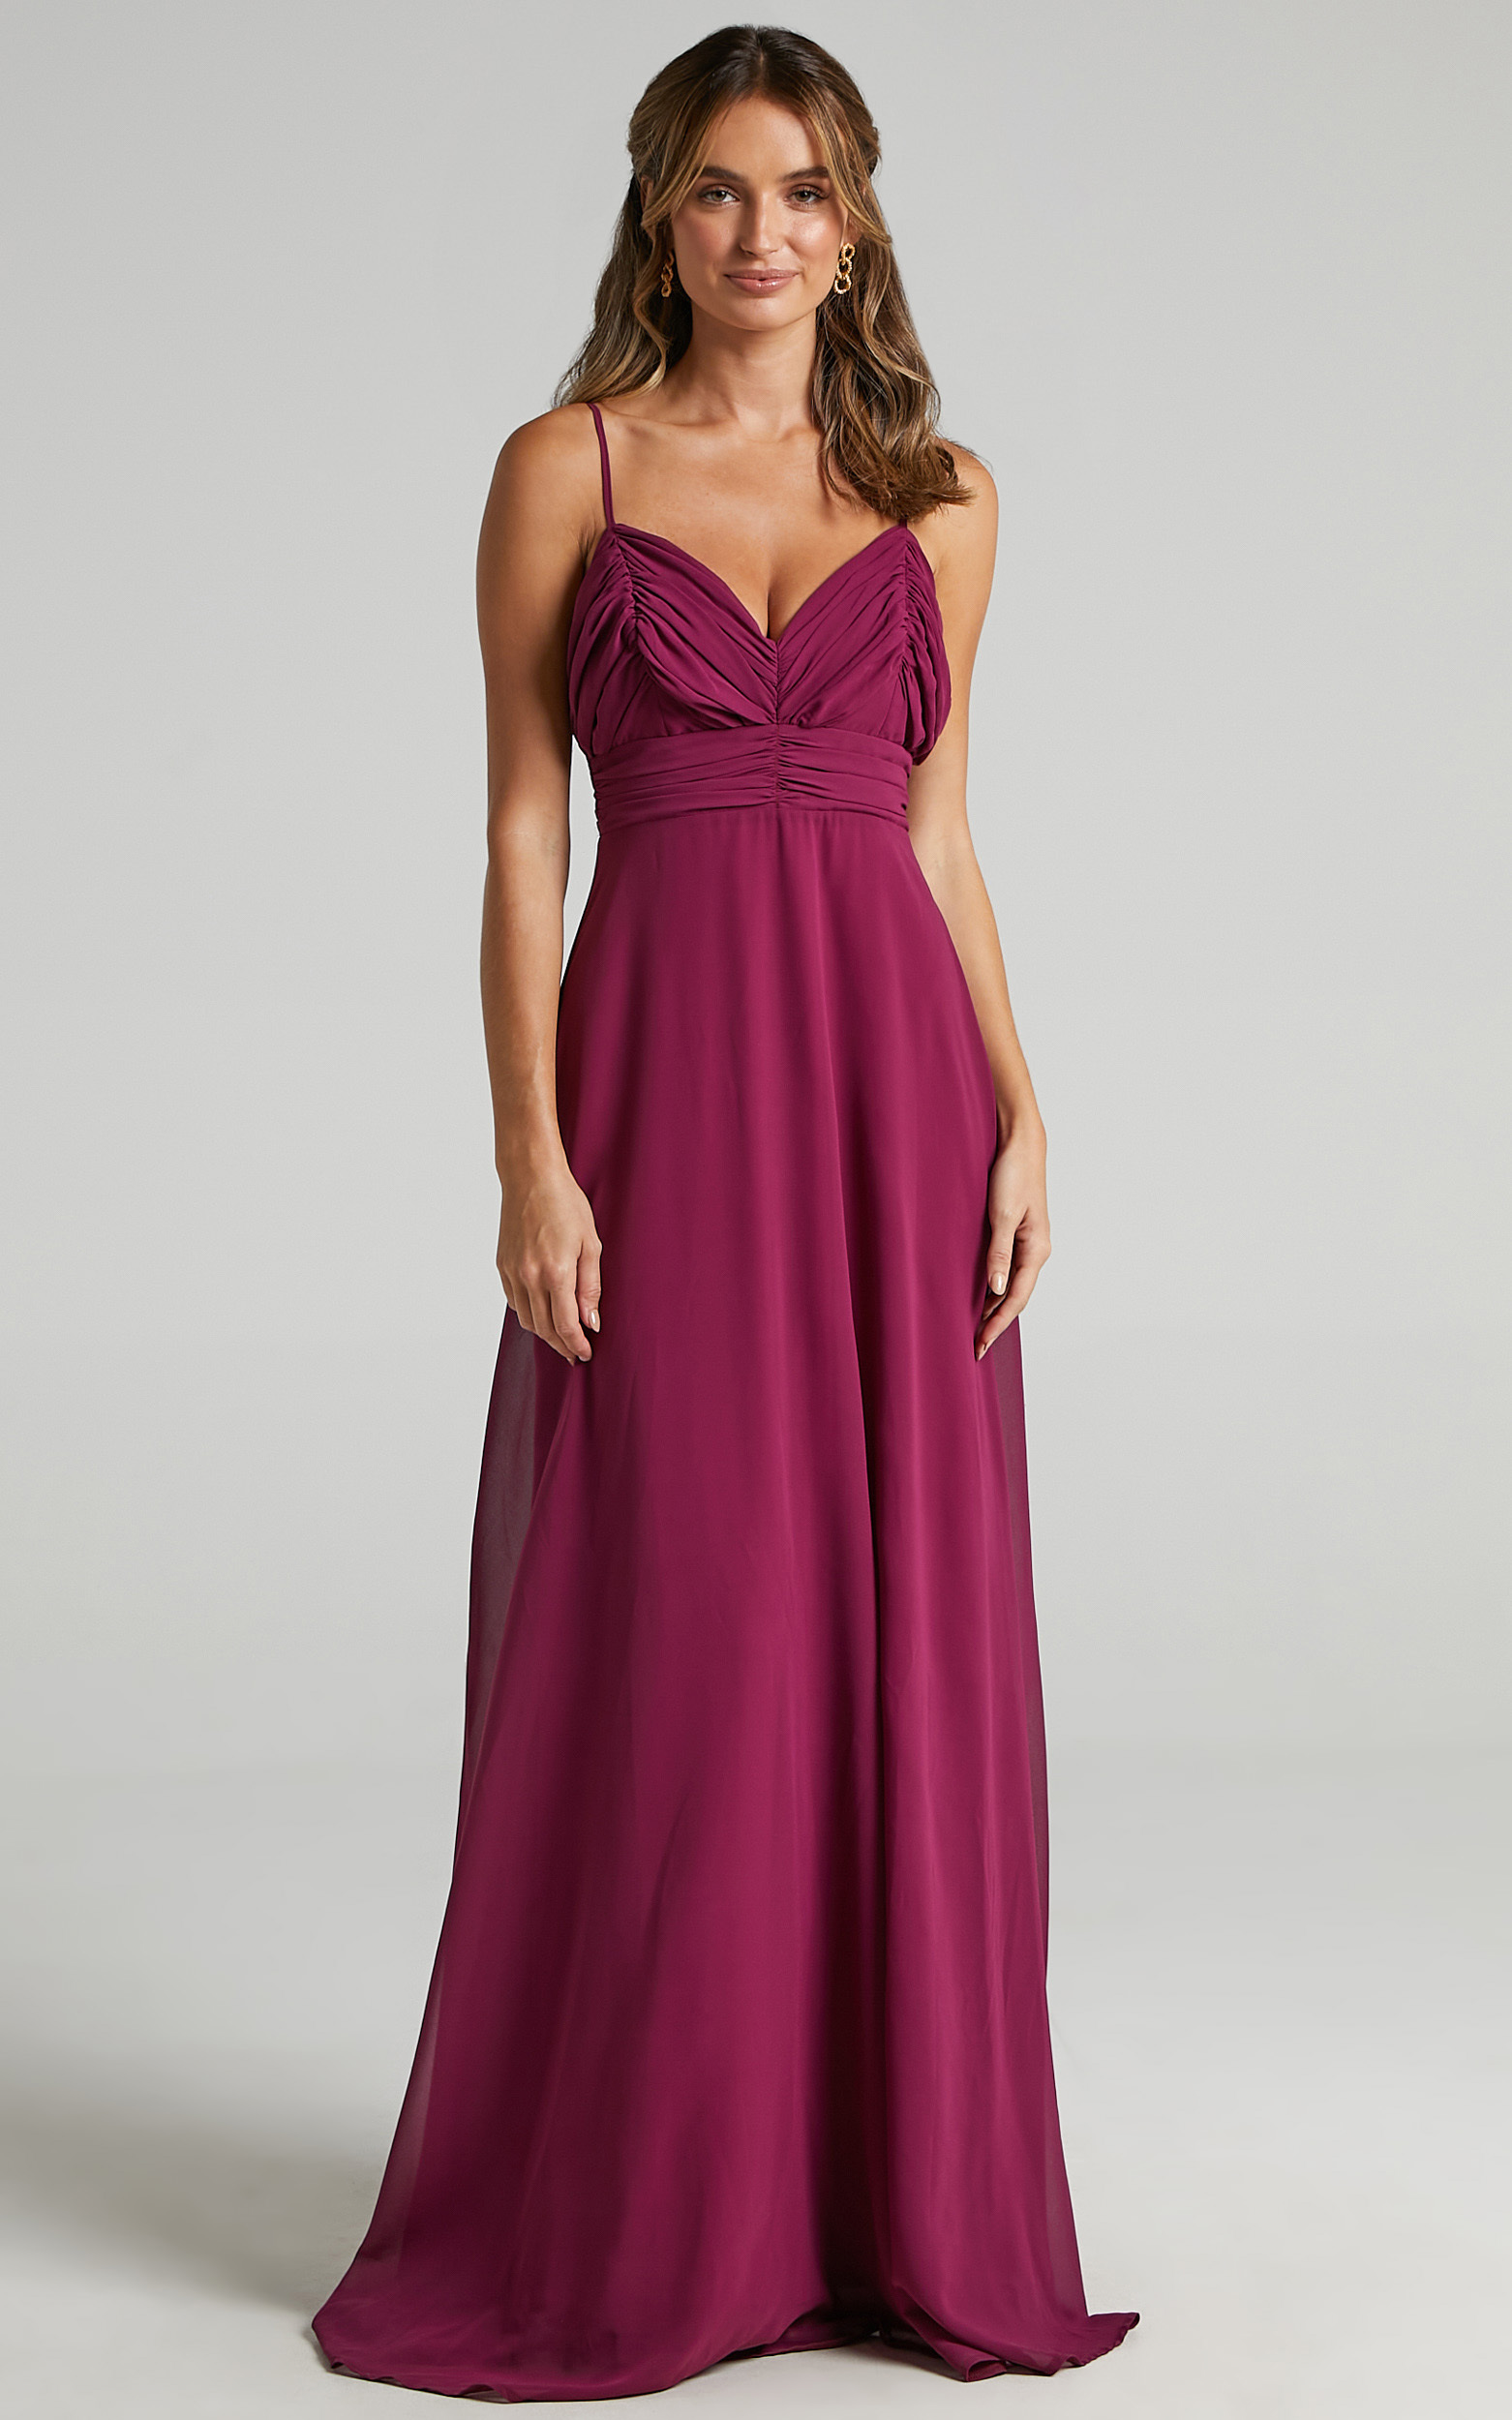 Just One Dance Dress in Mulberry - 06, PRP2, hi-res image number null